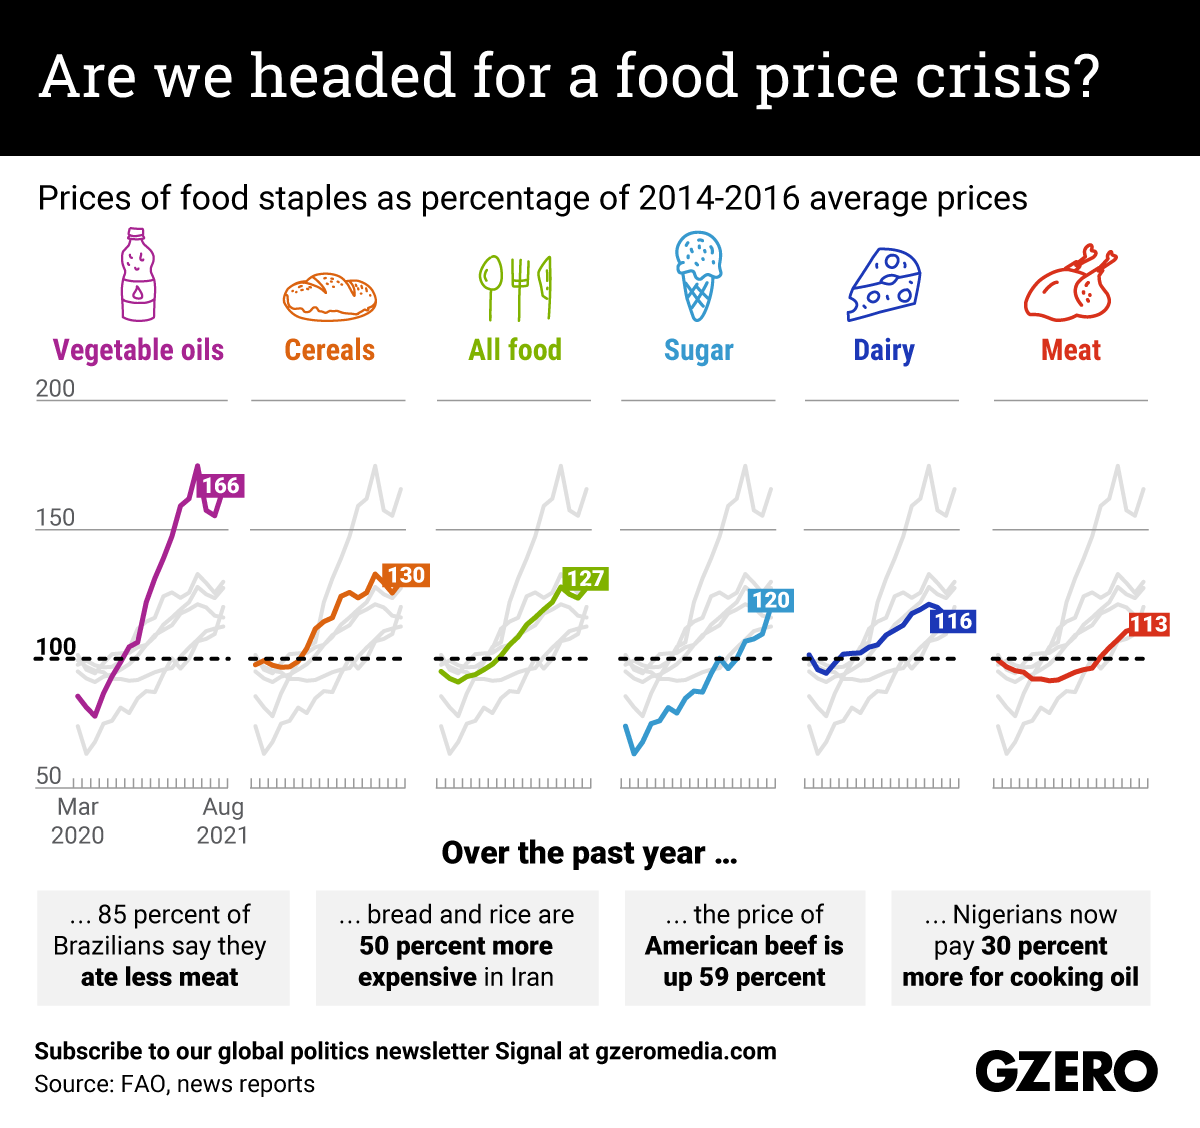 The Graphic Truth: Are we headed for a food price crisis?